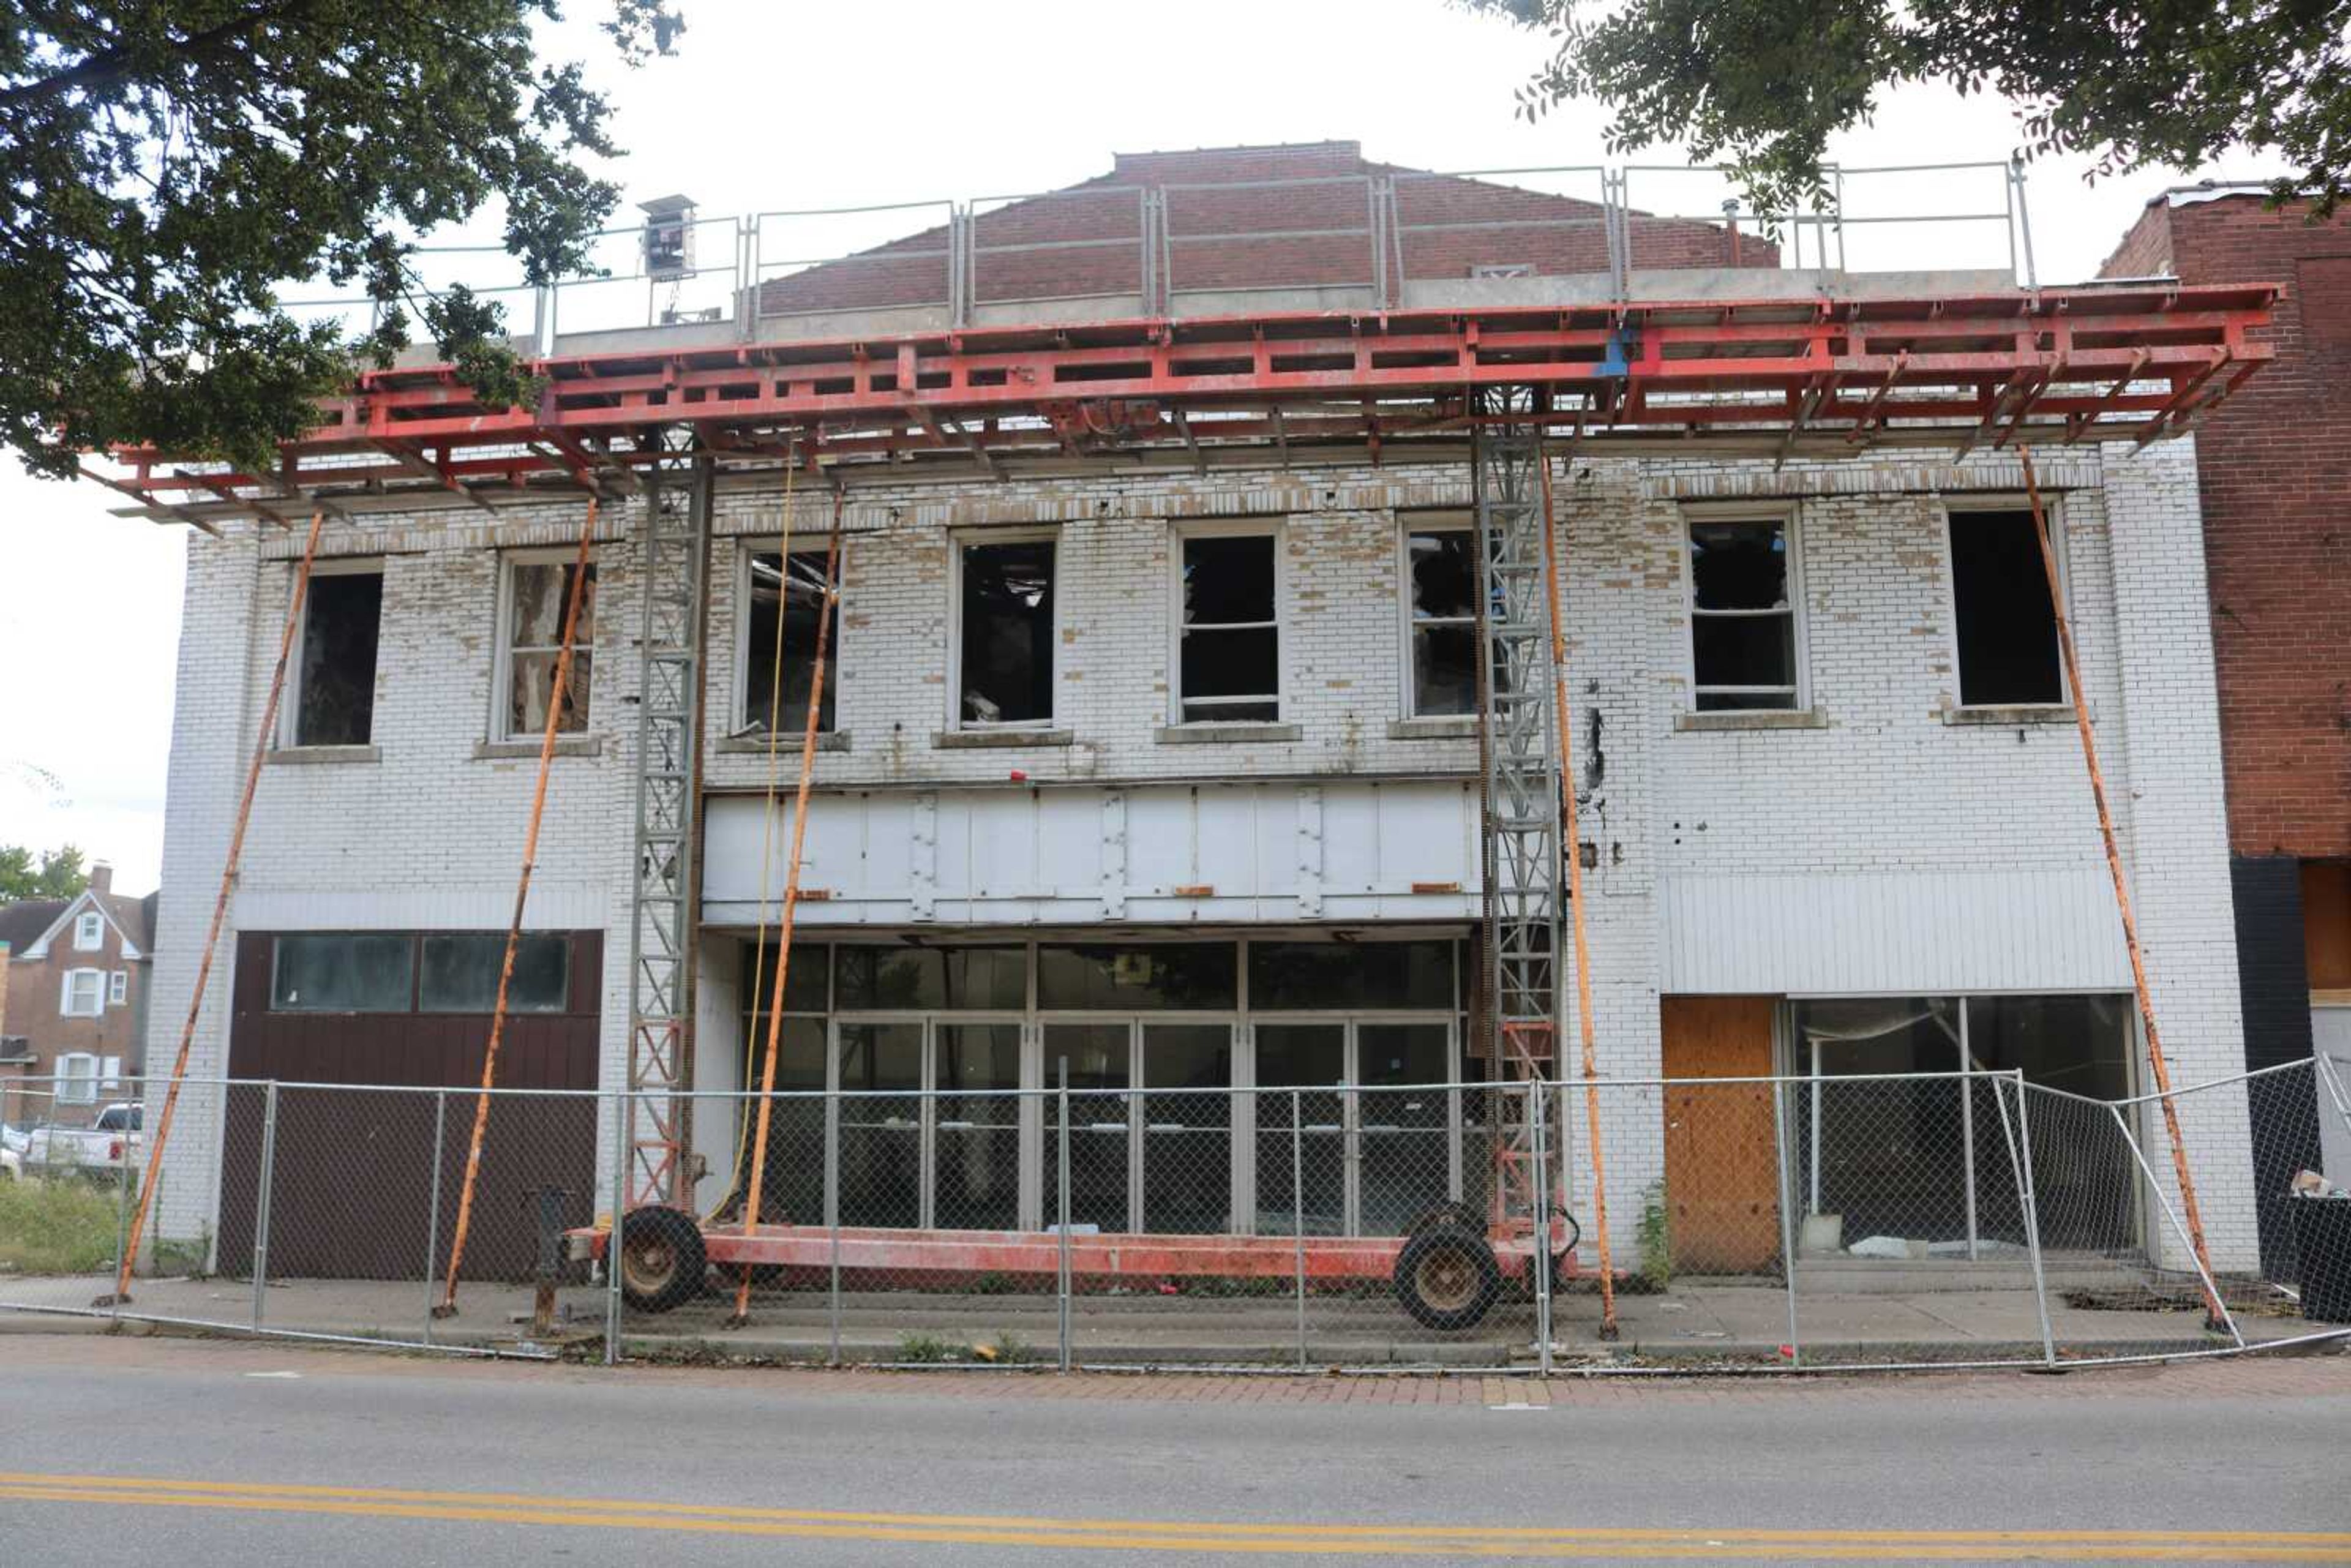 The historic Broadway Theatre in downtown Cape Girardeau, built in 1921, awaits refurbishing as scaffolding temporarily secures the front of the recently burned building.